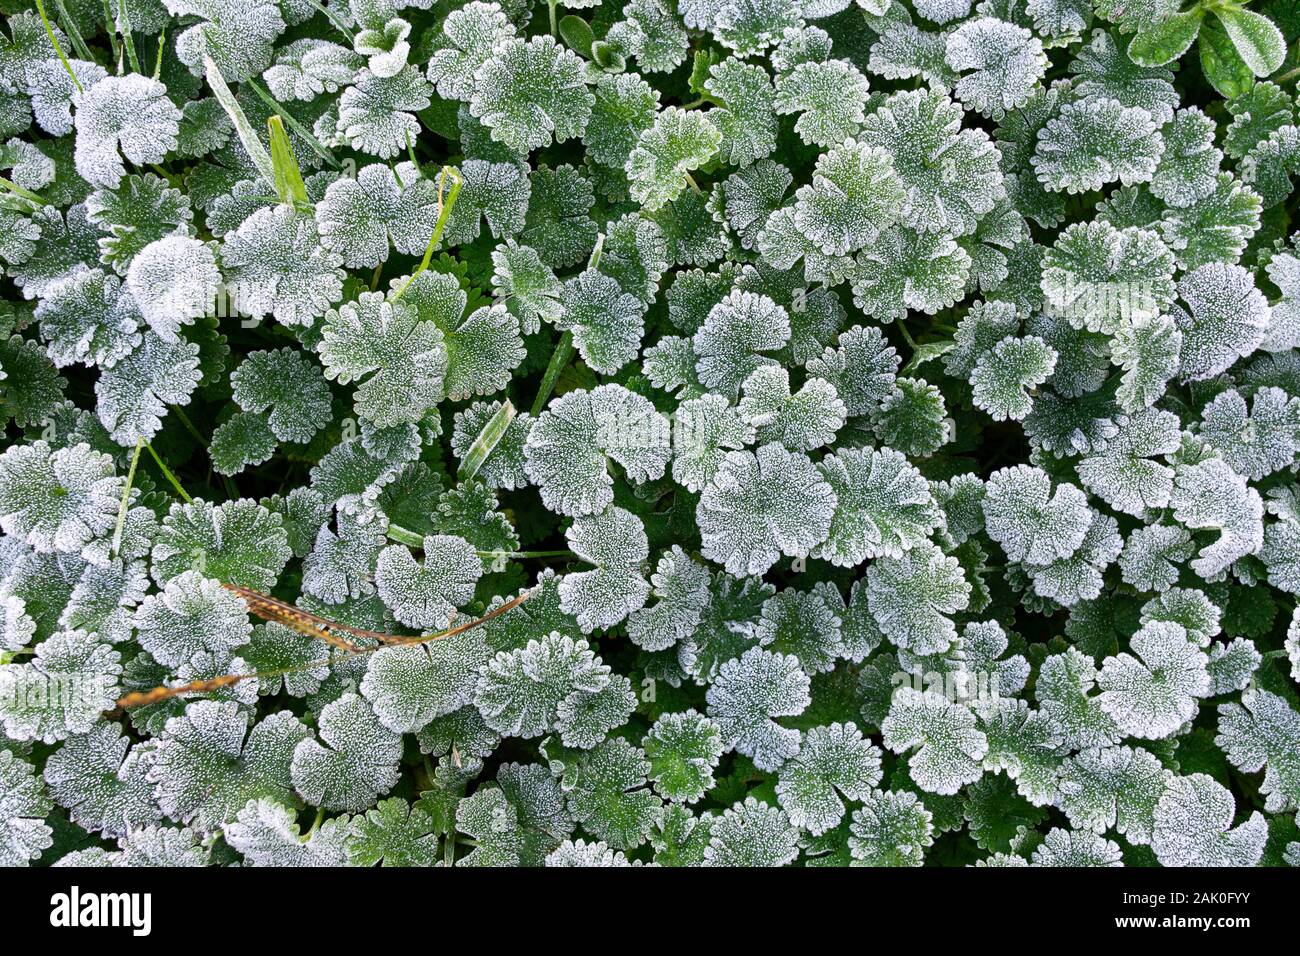 Winter nature background. Green leaves covered with white hoar frost and ice crystal formation Stock Photo